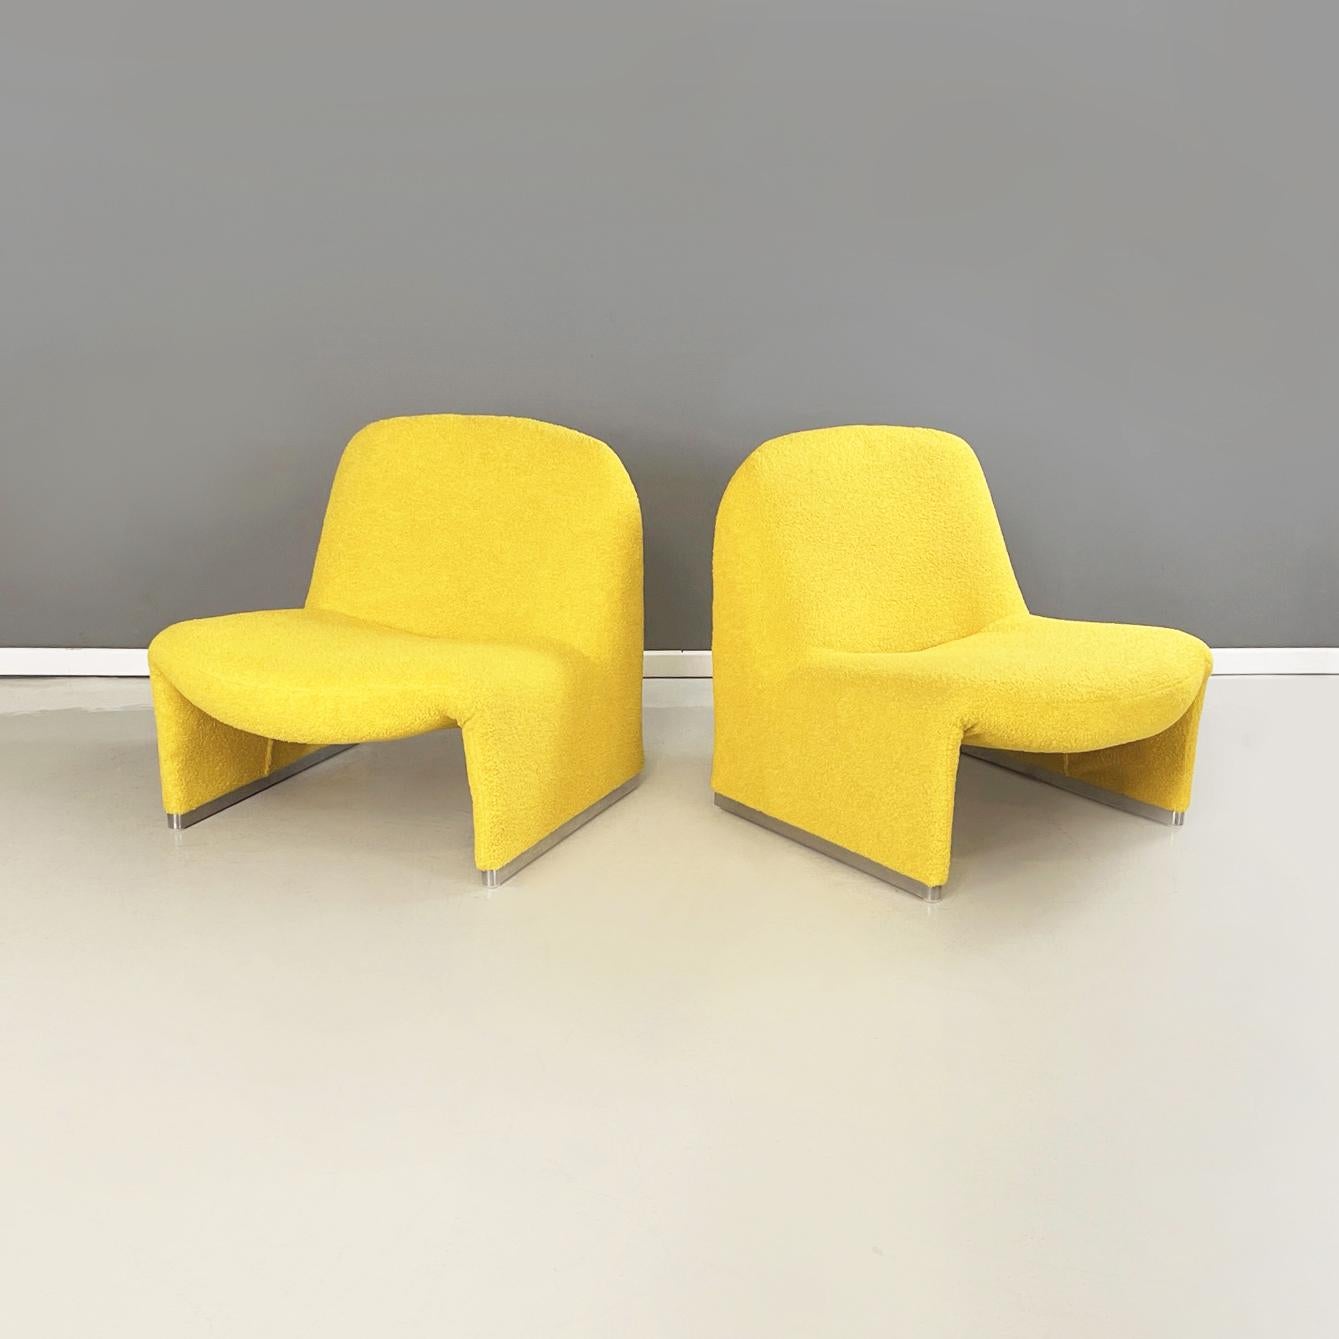 Italian modern yellow teddy fabric Armchairs Alky by Giancarlo Piretti for Anonima Castelli, 1970s
Pair of armchair mod. Alky in yellow teddy fabric. The monocoque structure is provided on both sides with satin aluminum feet.
Produced by Anonima